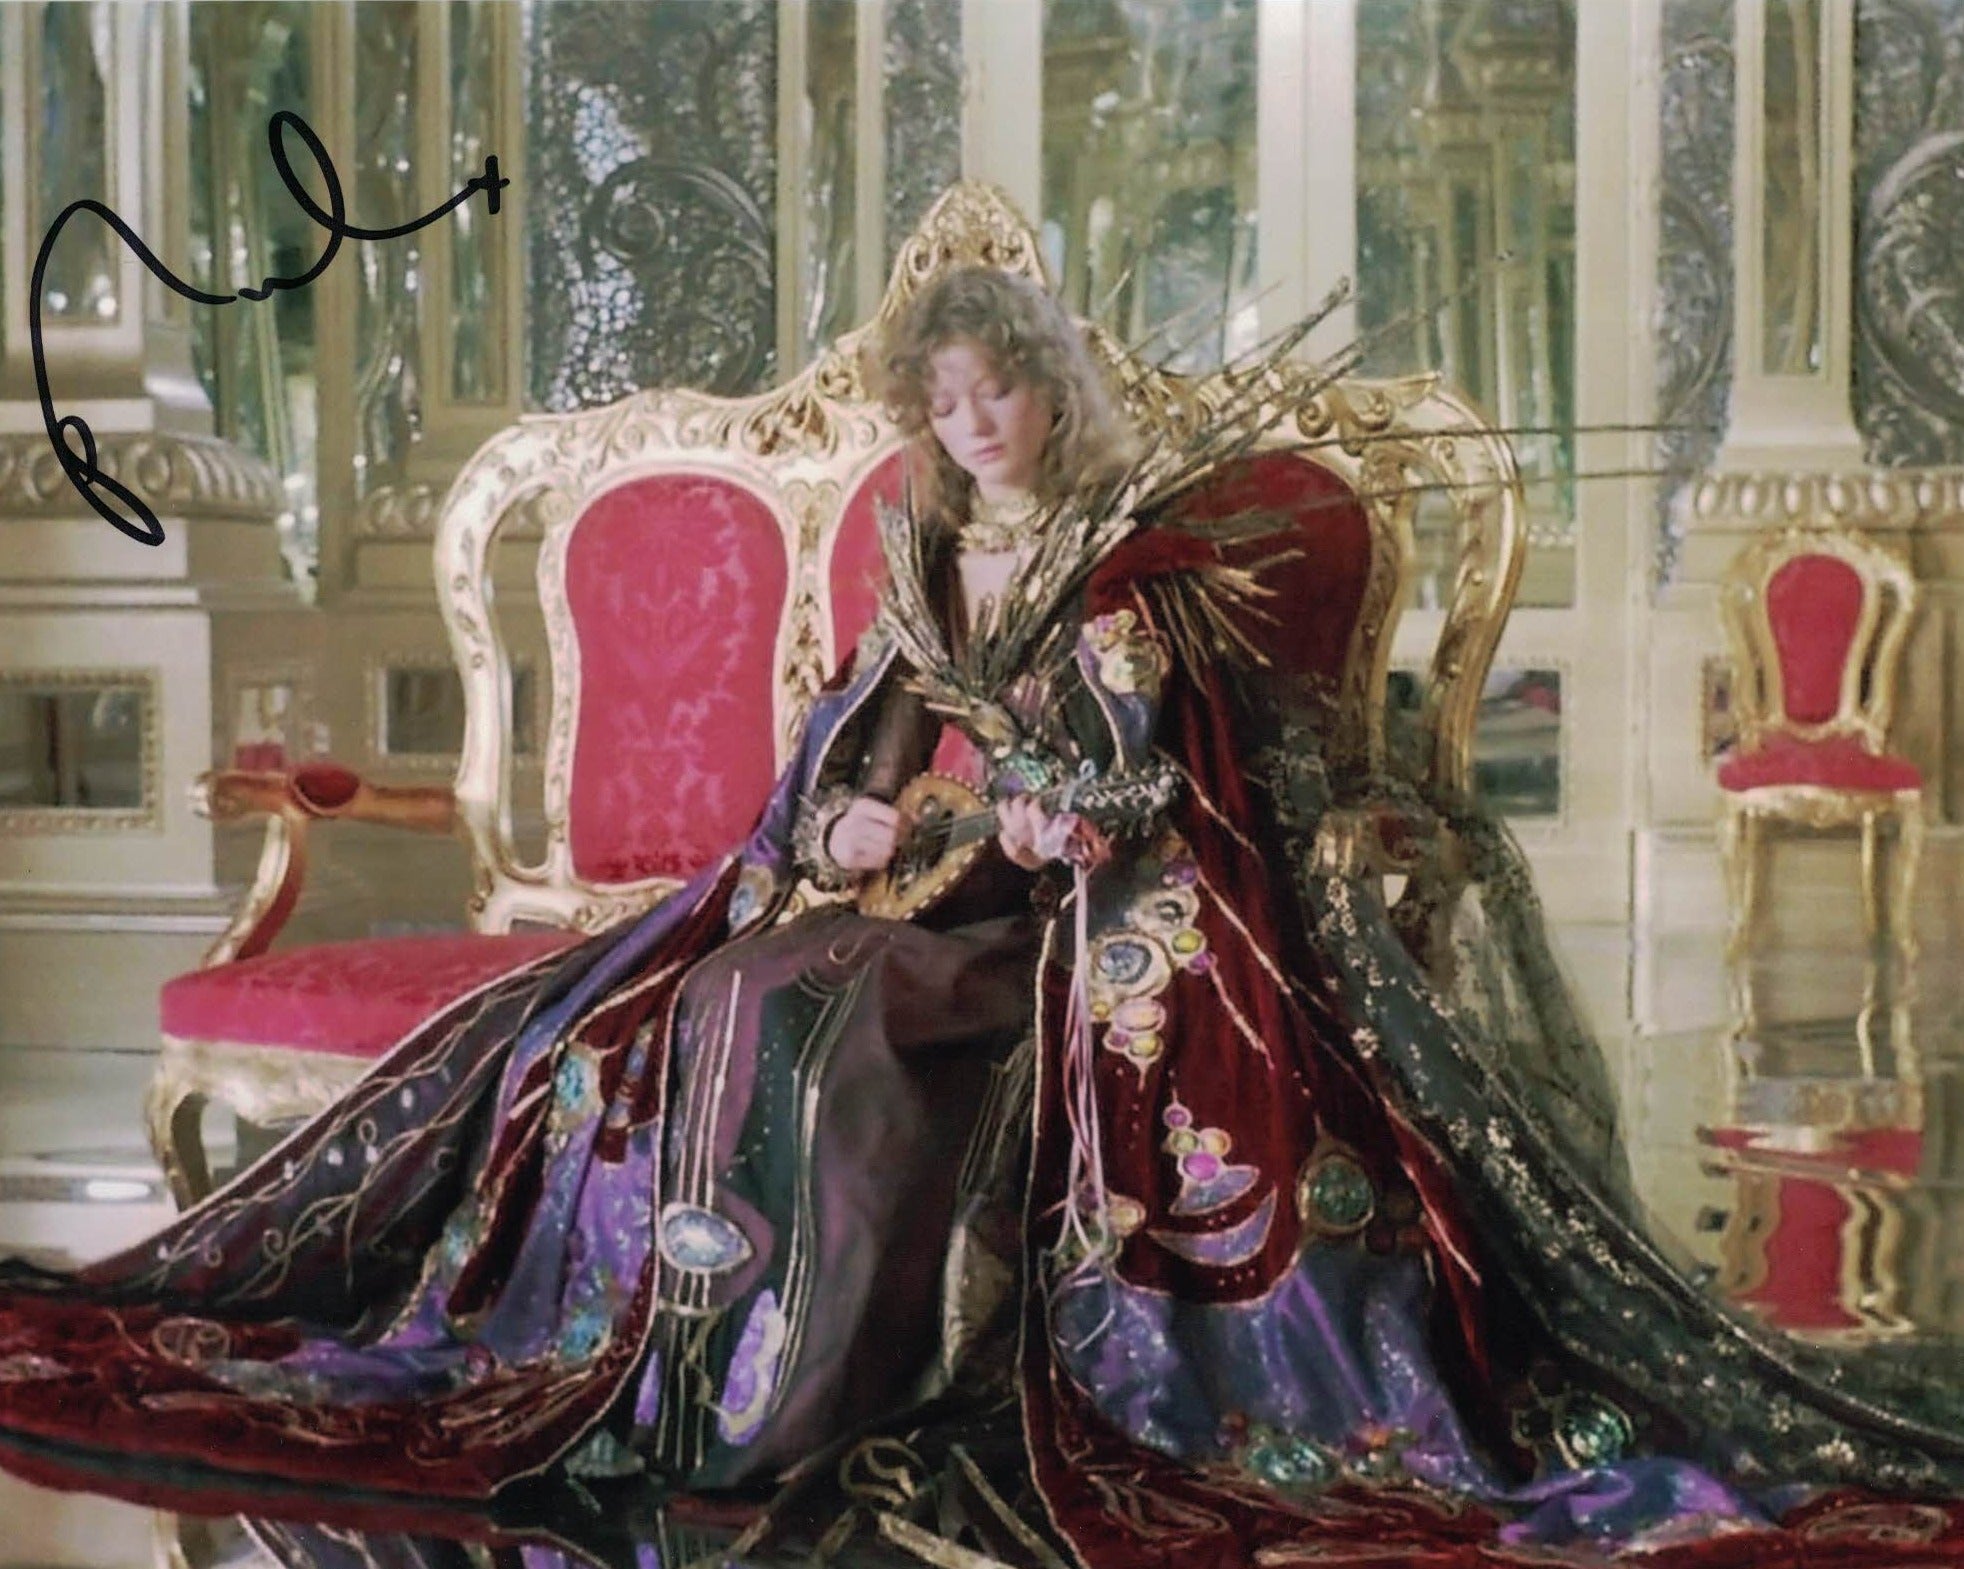 SOPHIE WARD - Mombi 2 in Return To Oz- hand signed 10 x 8 photo